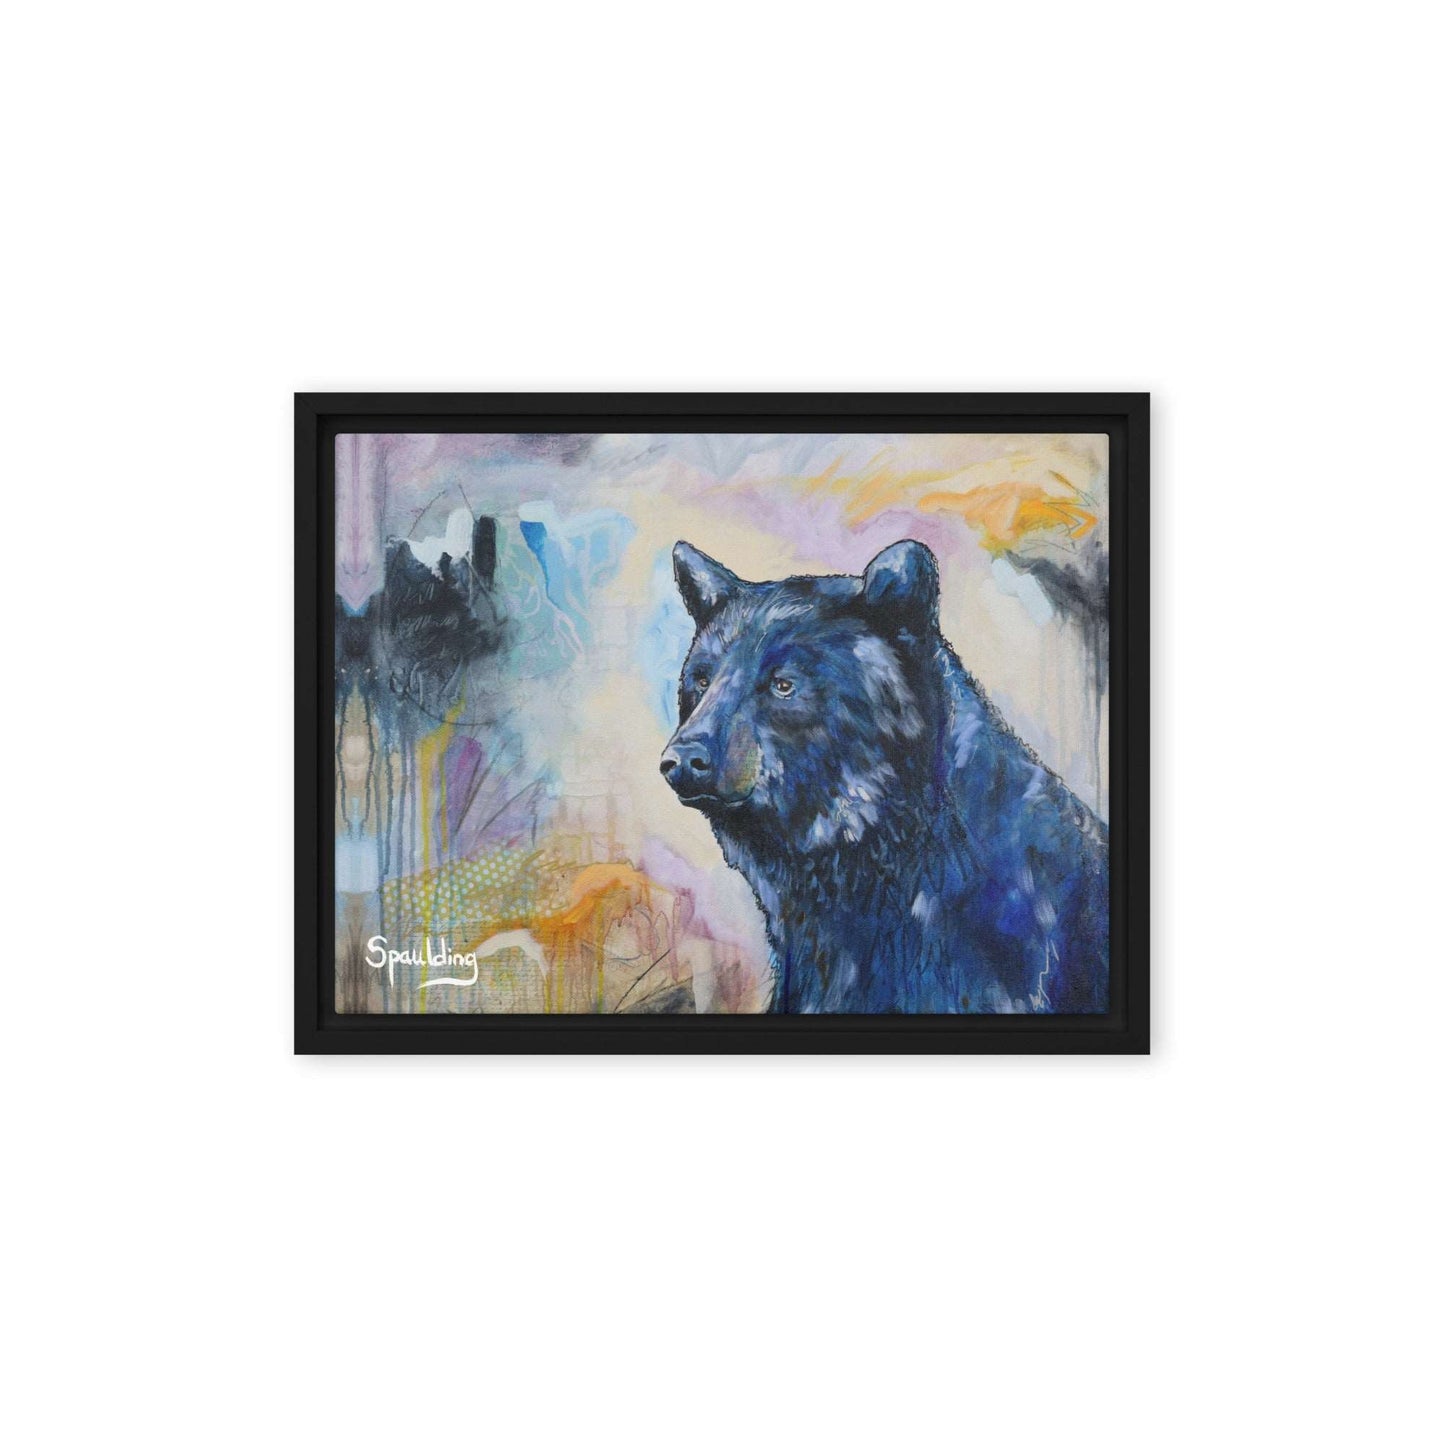 Framed Canvas print black bear in the corner looking out  color palette of blues, greys, oranges and black.